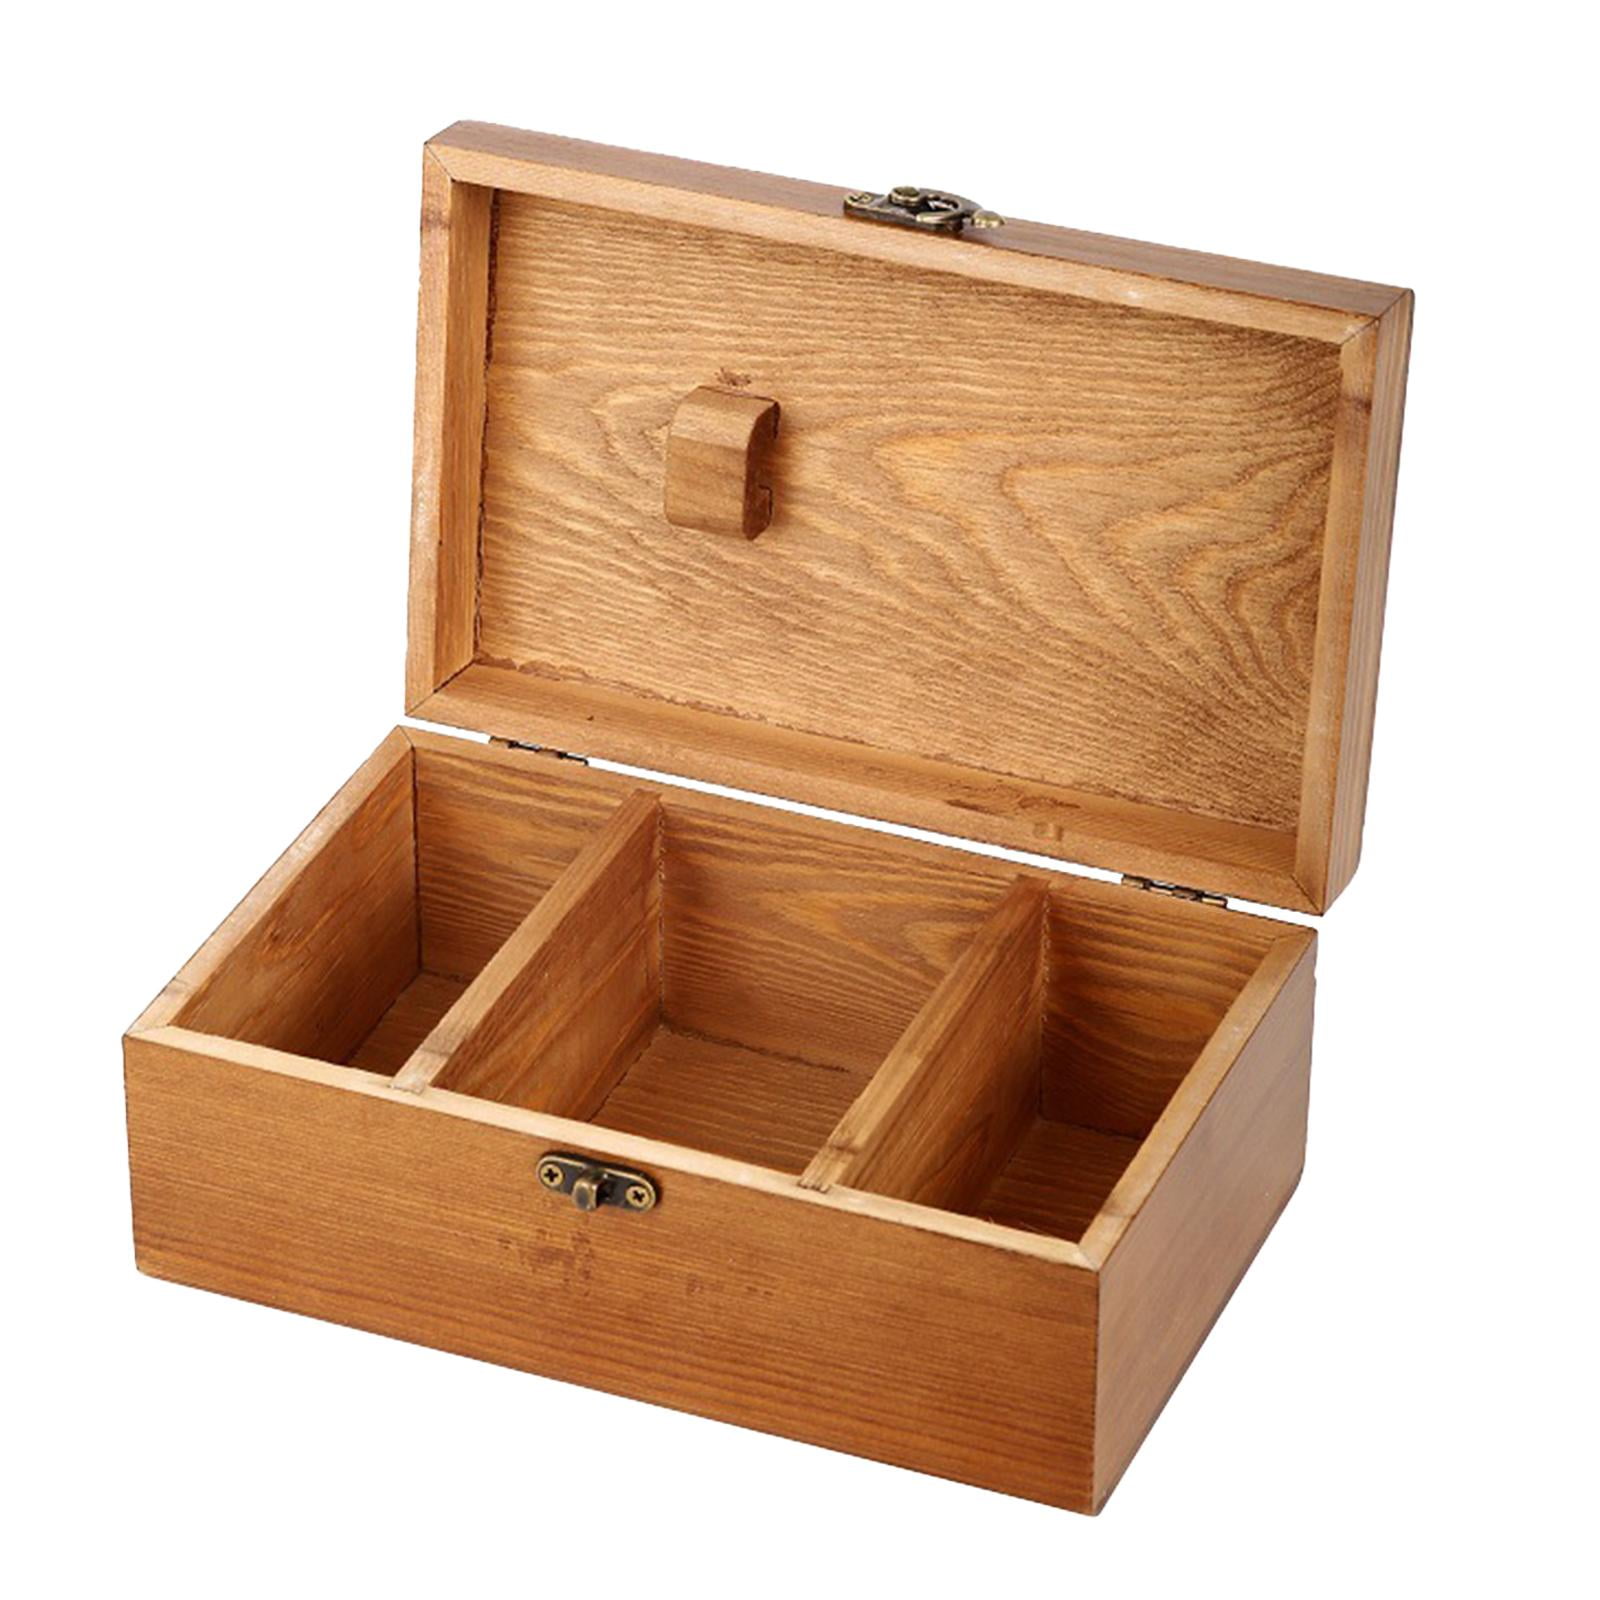 Wooden Sewing Basket/sewing Box With Sewing Kit Accessories - Box For  Organizer With Wooden Storage